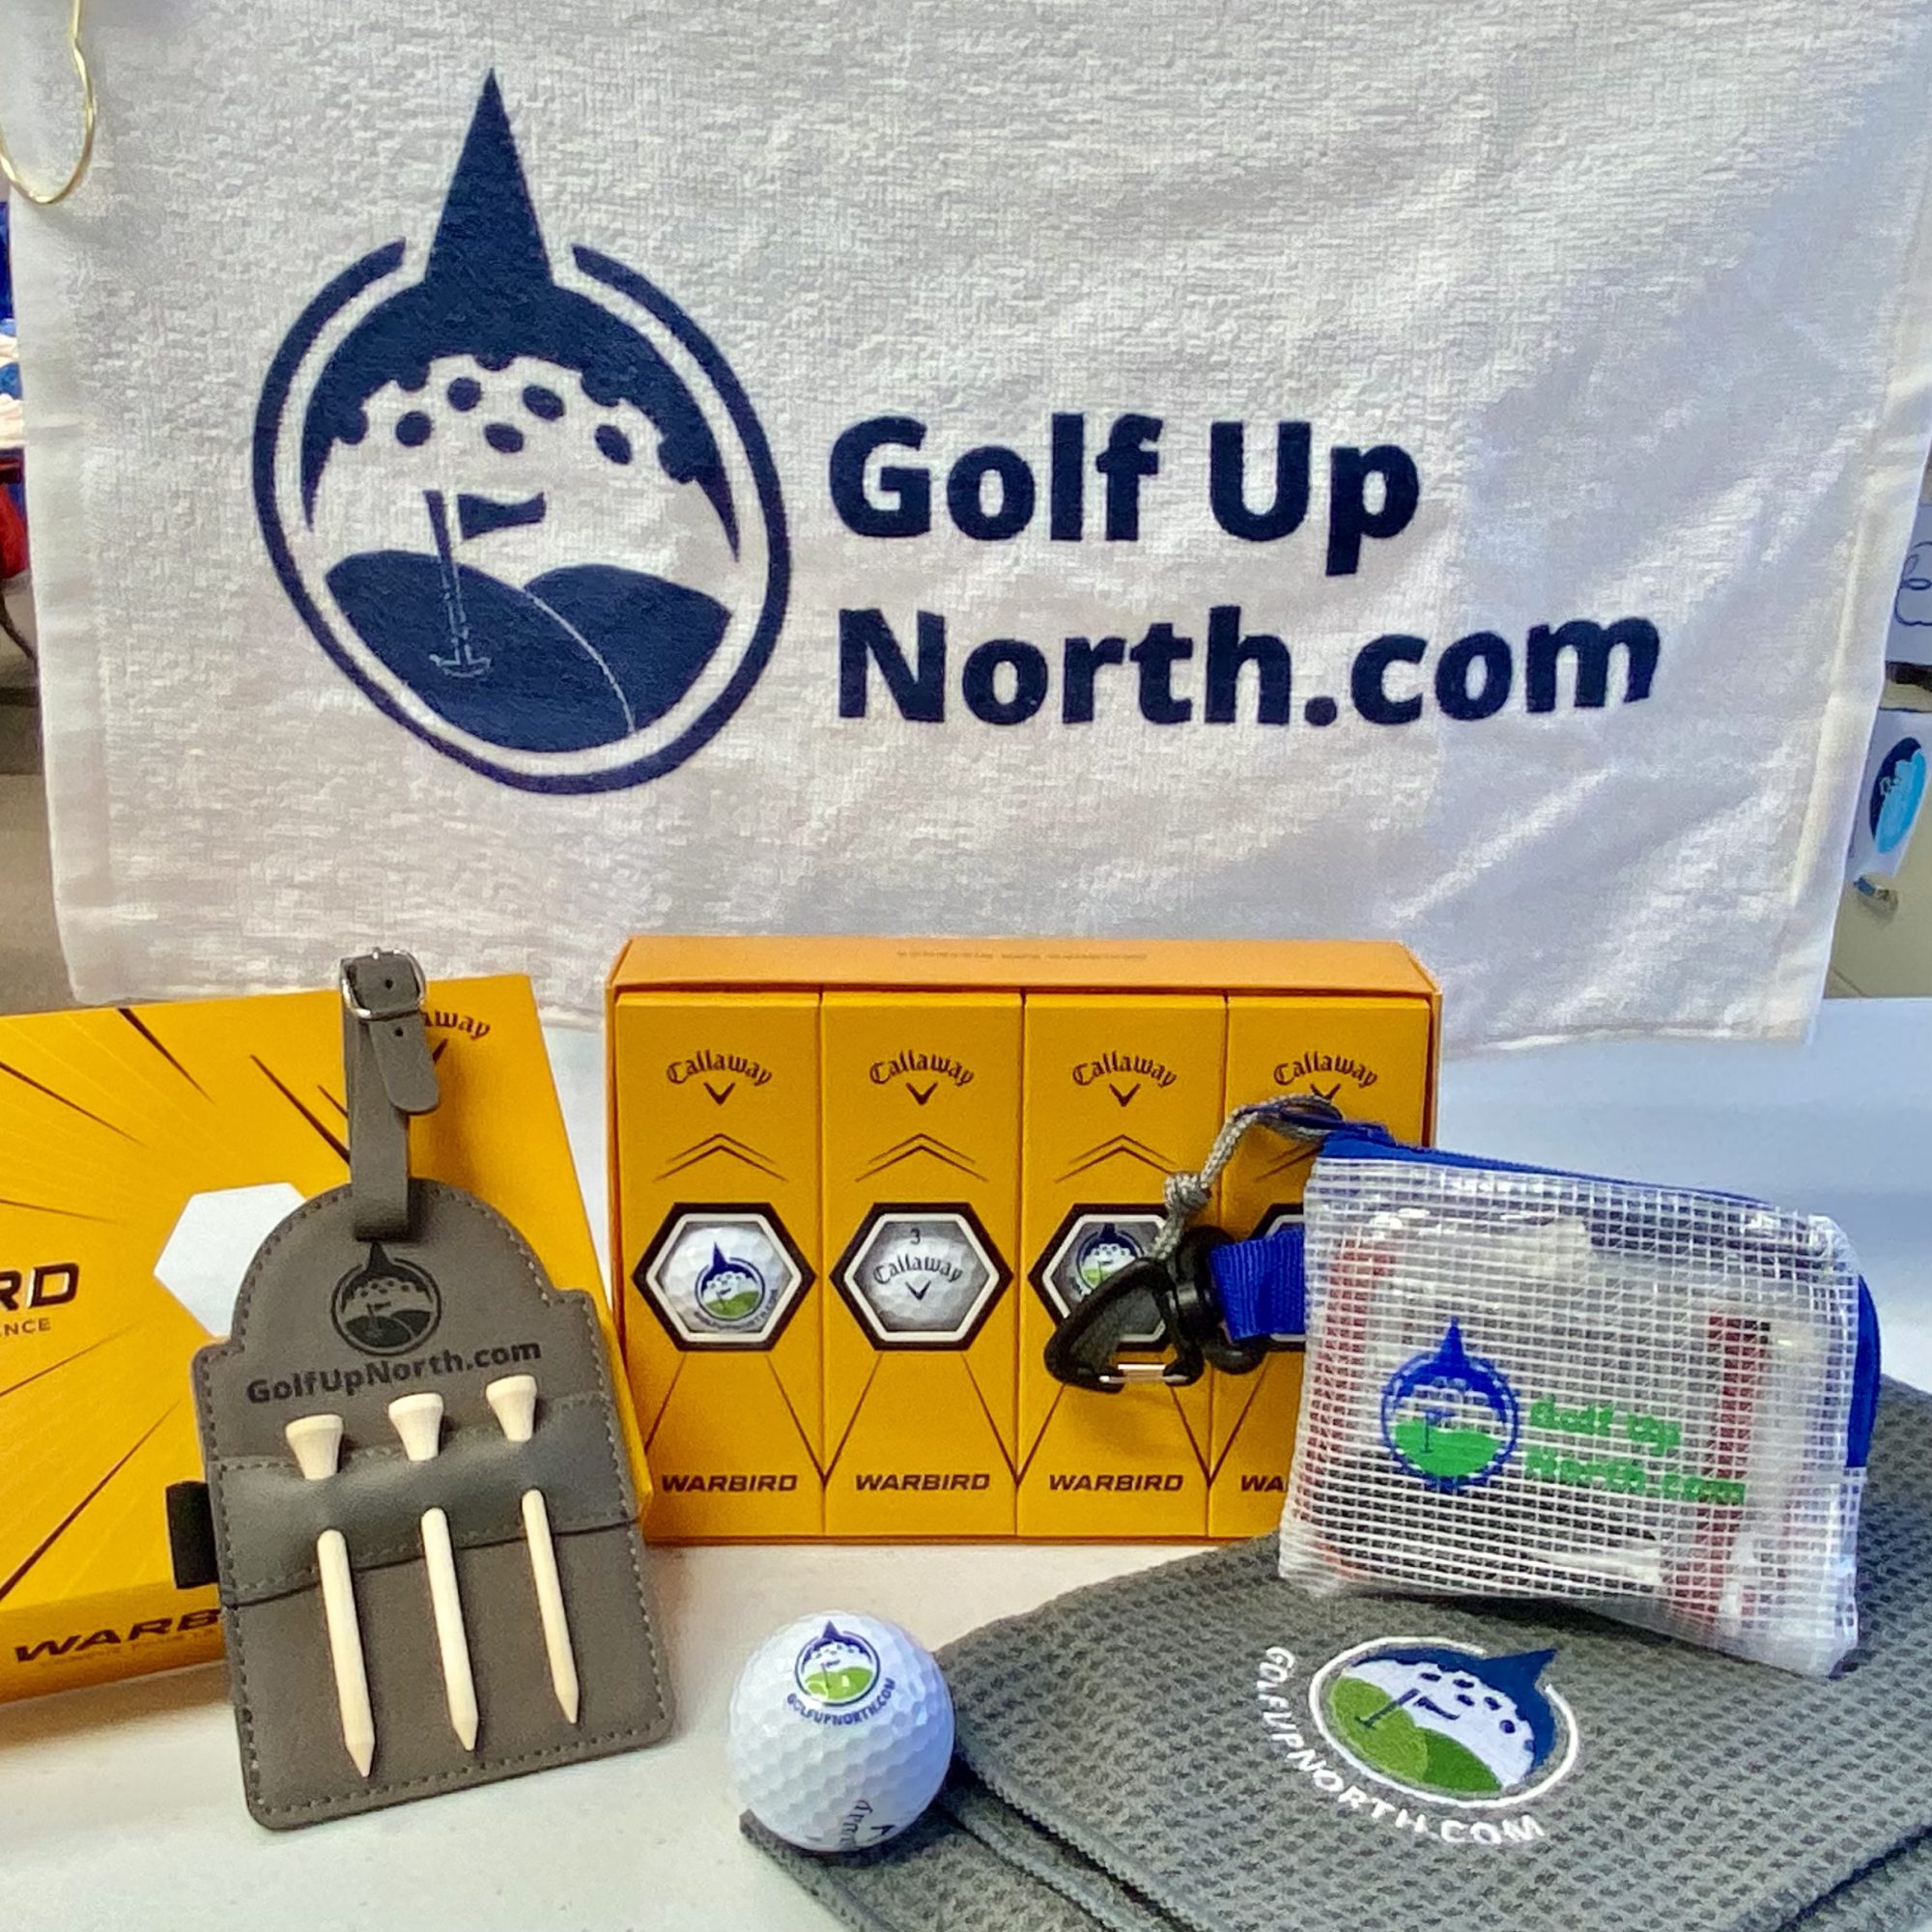 Jentees Promotional Items Golf Up North